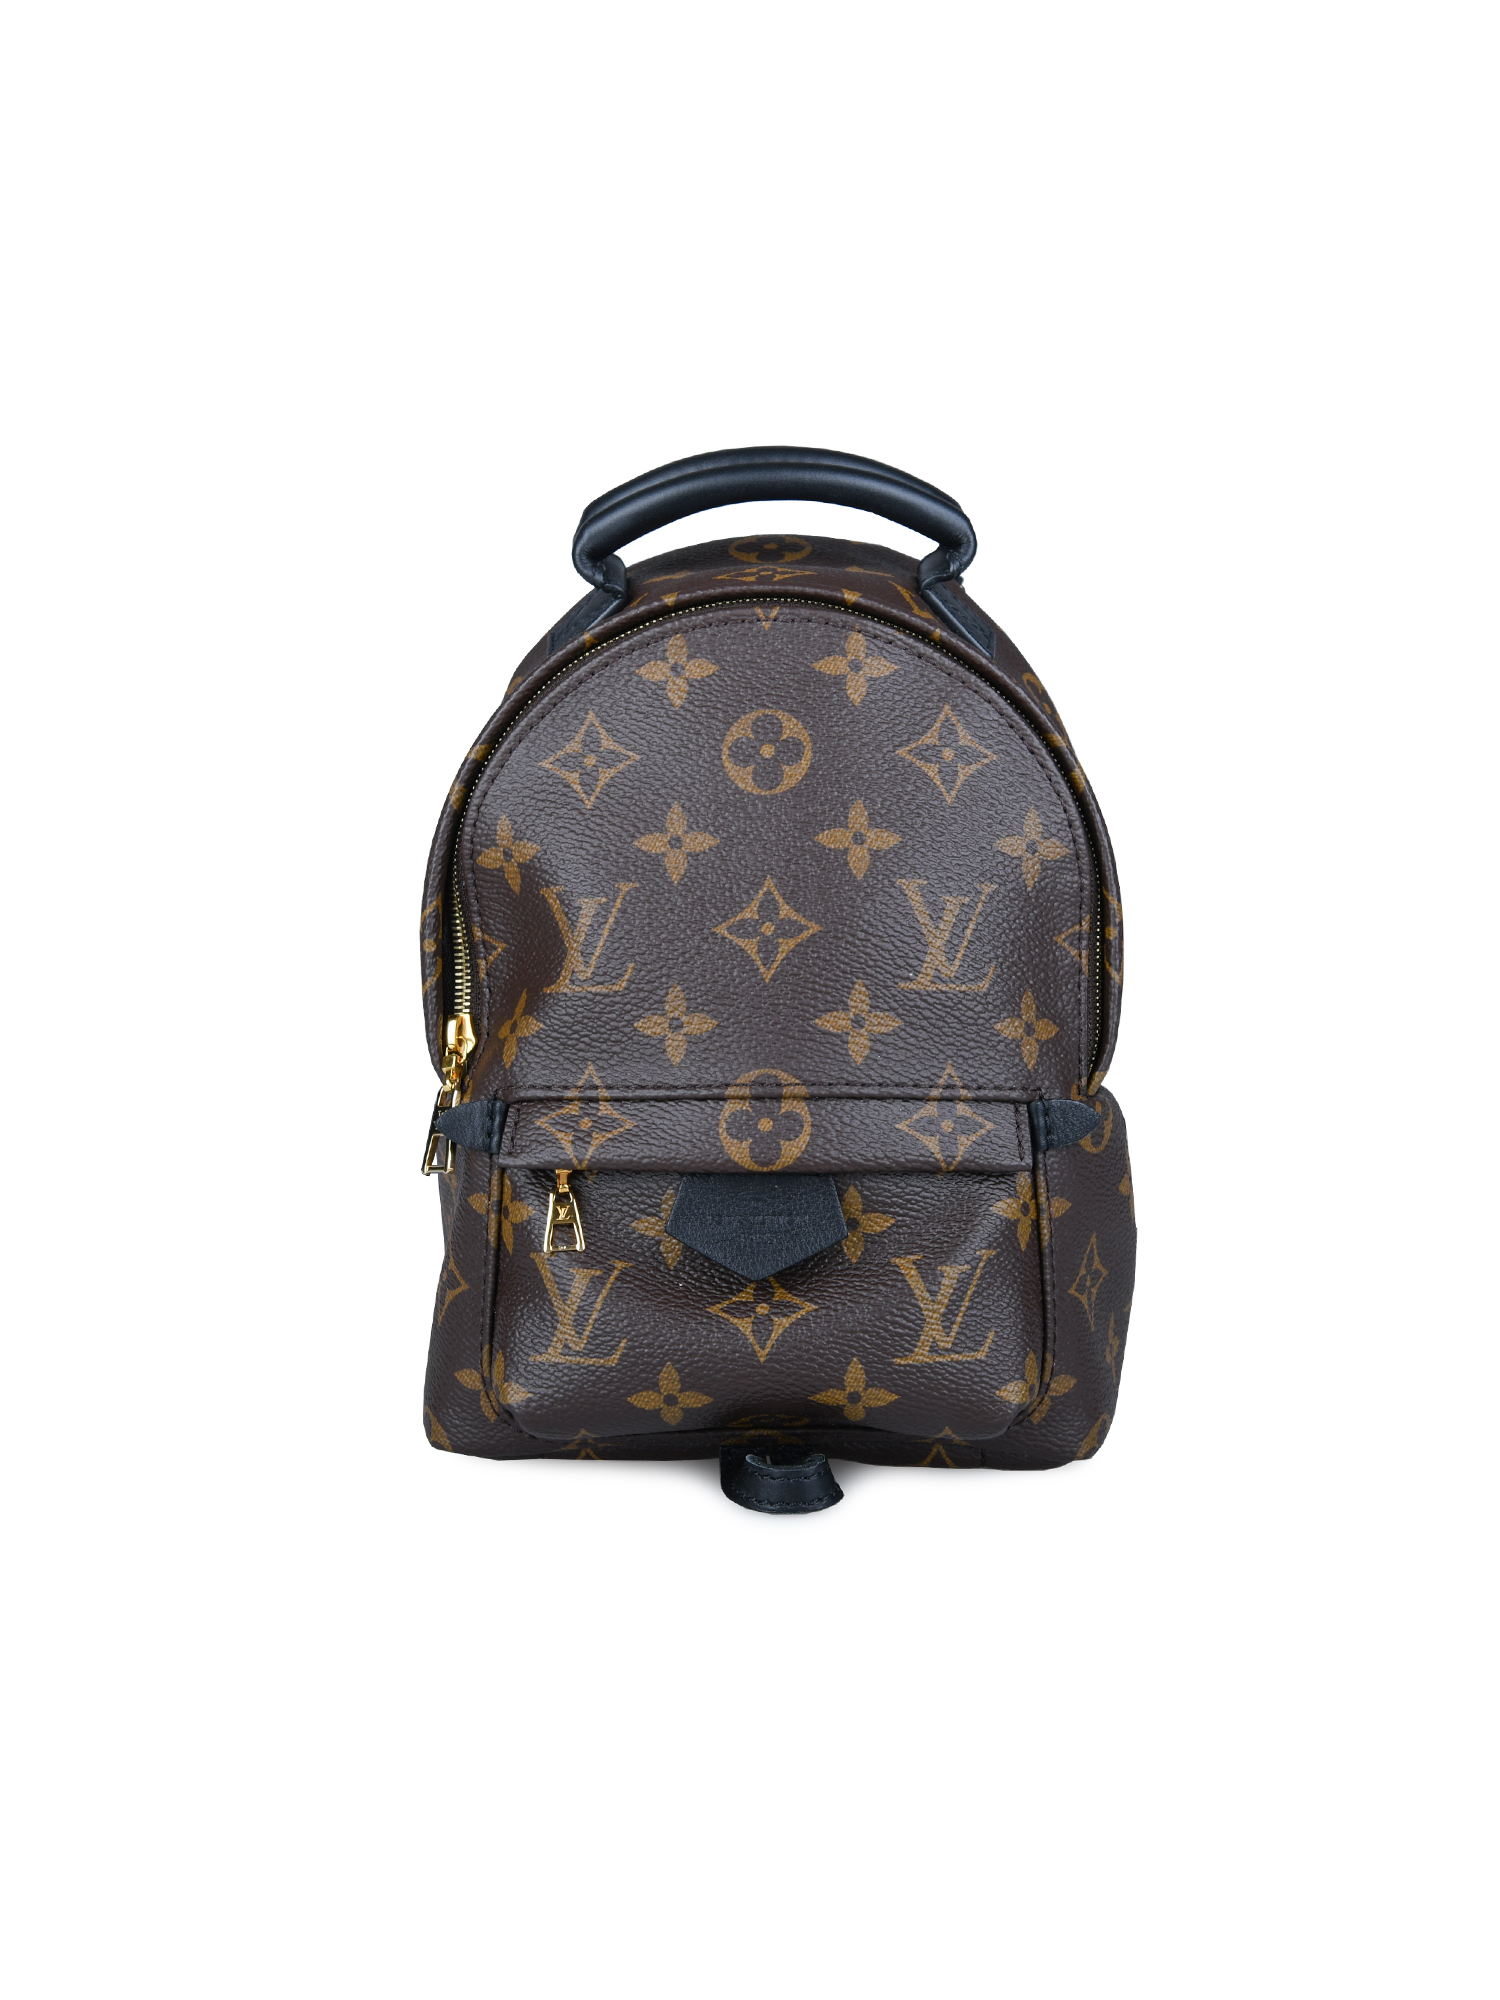 Louis vuitton PALM SPRINGS BACKPACK PM  AJ GOLD NORWAY